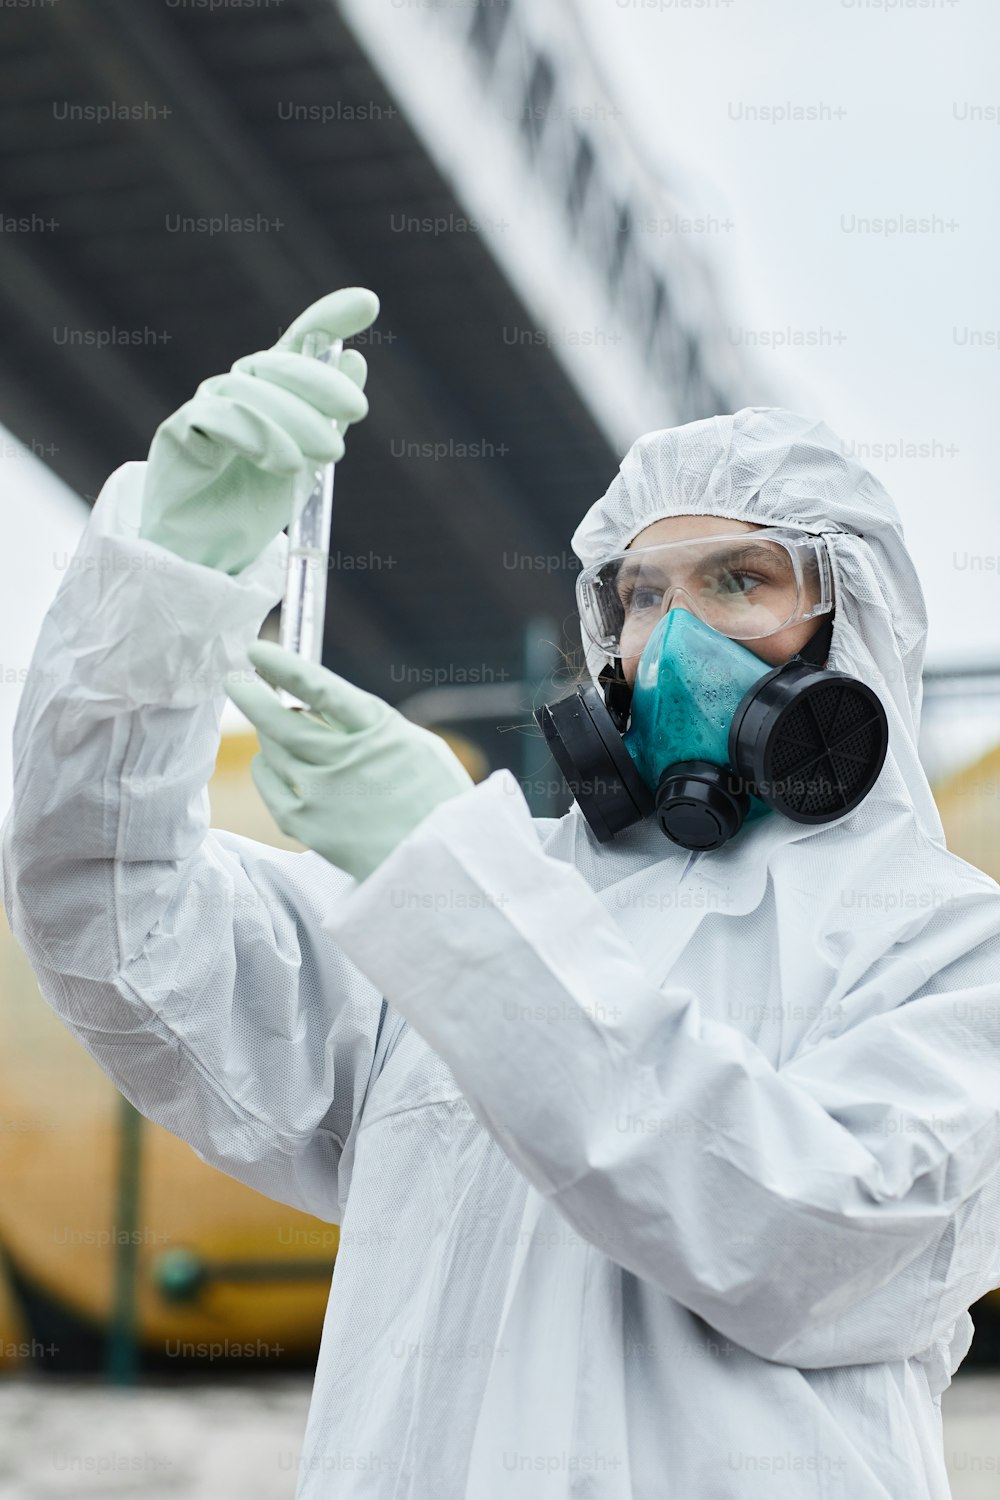 Waist up portrait of female scientist wearing hazmat suit collecting samples outdoors, toxic waste and pollution concept